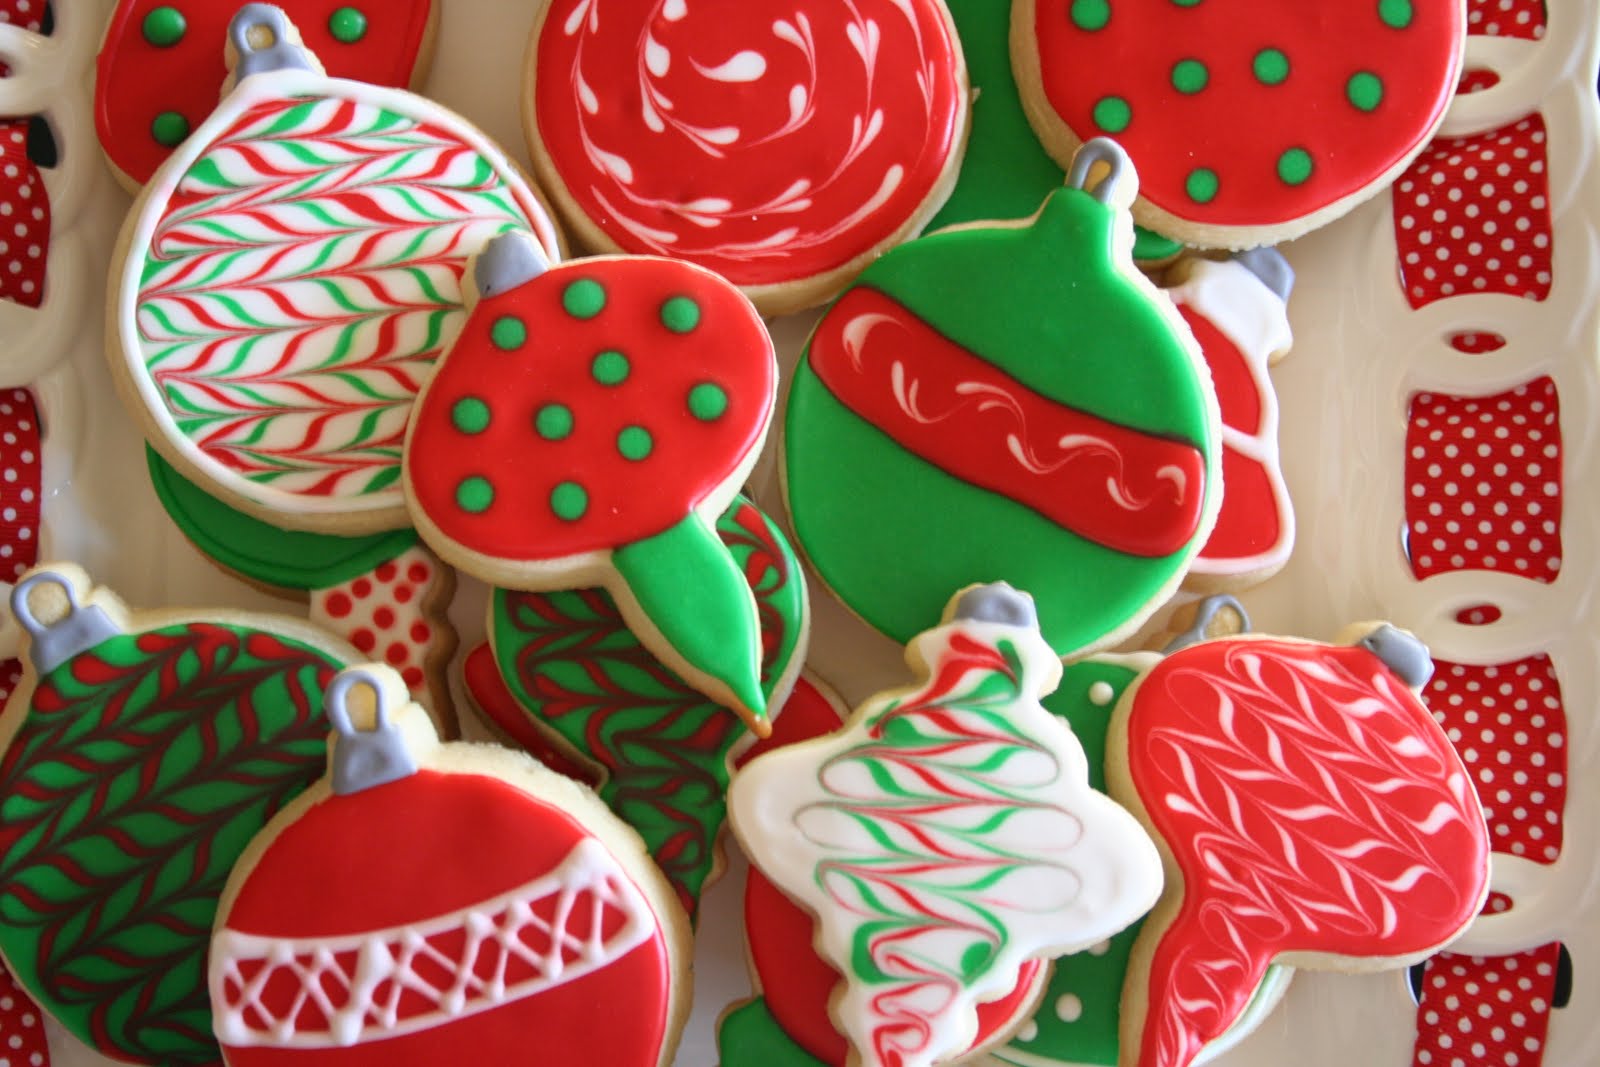 Fresh Cut Flours: Christmas Cookies and a Giveaway!